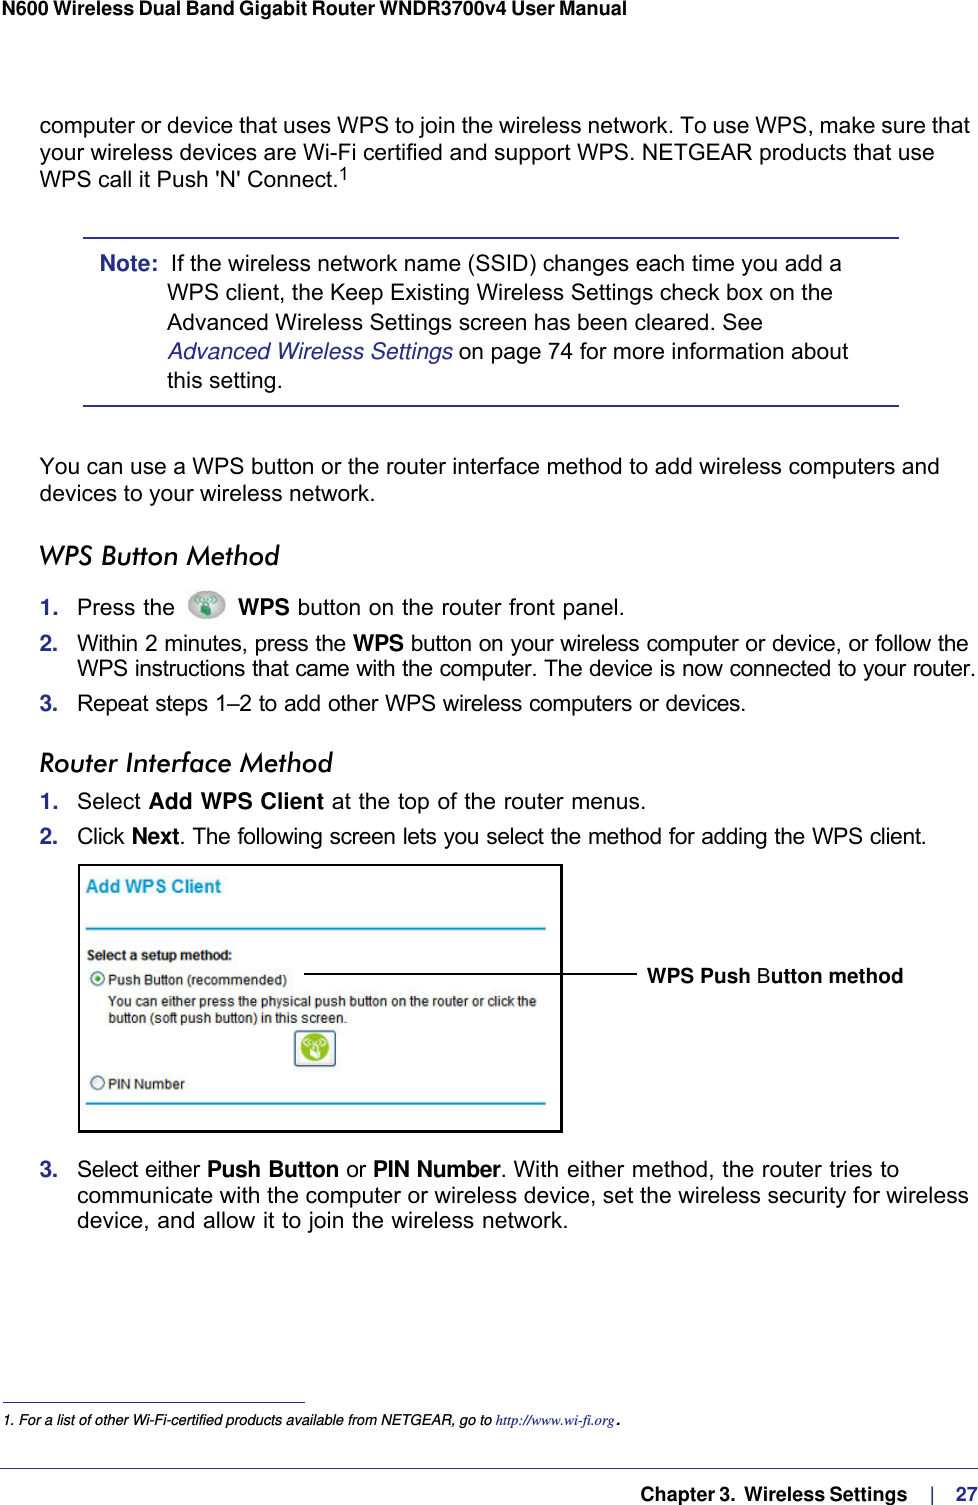   Chapter 3.  Wireless Settings     |    27N600 Wireless Dual Band Gigabit Router WNDR3700v4 User Manual computer or device that uses WPS to join the wireless network. To use WPS, make sure that your wireless devices are Wi-Fi certified and support WPS. NETGEAR products that use WPS call it Push &apos;N&apos; Connect.1 Note:  If the wireless network name (SSID) changes each time you add a WPS client, the Keep Existing Wireless Settings check box on the Advanced Wireless Settings screen has been cleared. See Advanced Wireless Settings on page  74 for more information about this setting.You can use a WPS button or the router interface method to add wireless computers and devices to your wireless network.WPS Button Method1.  Press the   WPS button on the router front panel.2.  Within 2 minutes, press the WPS button on your wireless computer or device, or follow the WPS instructions that came with the computer. The device is now connected to your router.3.  Repeat steps 1–2 to add other WPS wireless computers or devices.Router Interface Method1.  Select Add WPS Client at the top of the router menus. 2.  Click Next. The following screen lets you select the method for adding the WPS client.WPS Push Button method3.  Select either Push Button or PIN Number. With either method, the router tries to communicate with the computer or wireless device, set the wireless security for wireless device, and allow it to join the wireless network.1. For a list of other Wi-Fi-certified products available from NETGEAR, go to http://www.wi-fi.org.